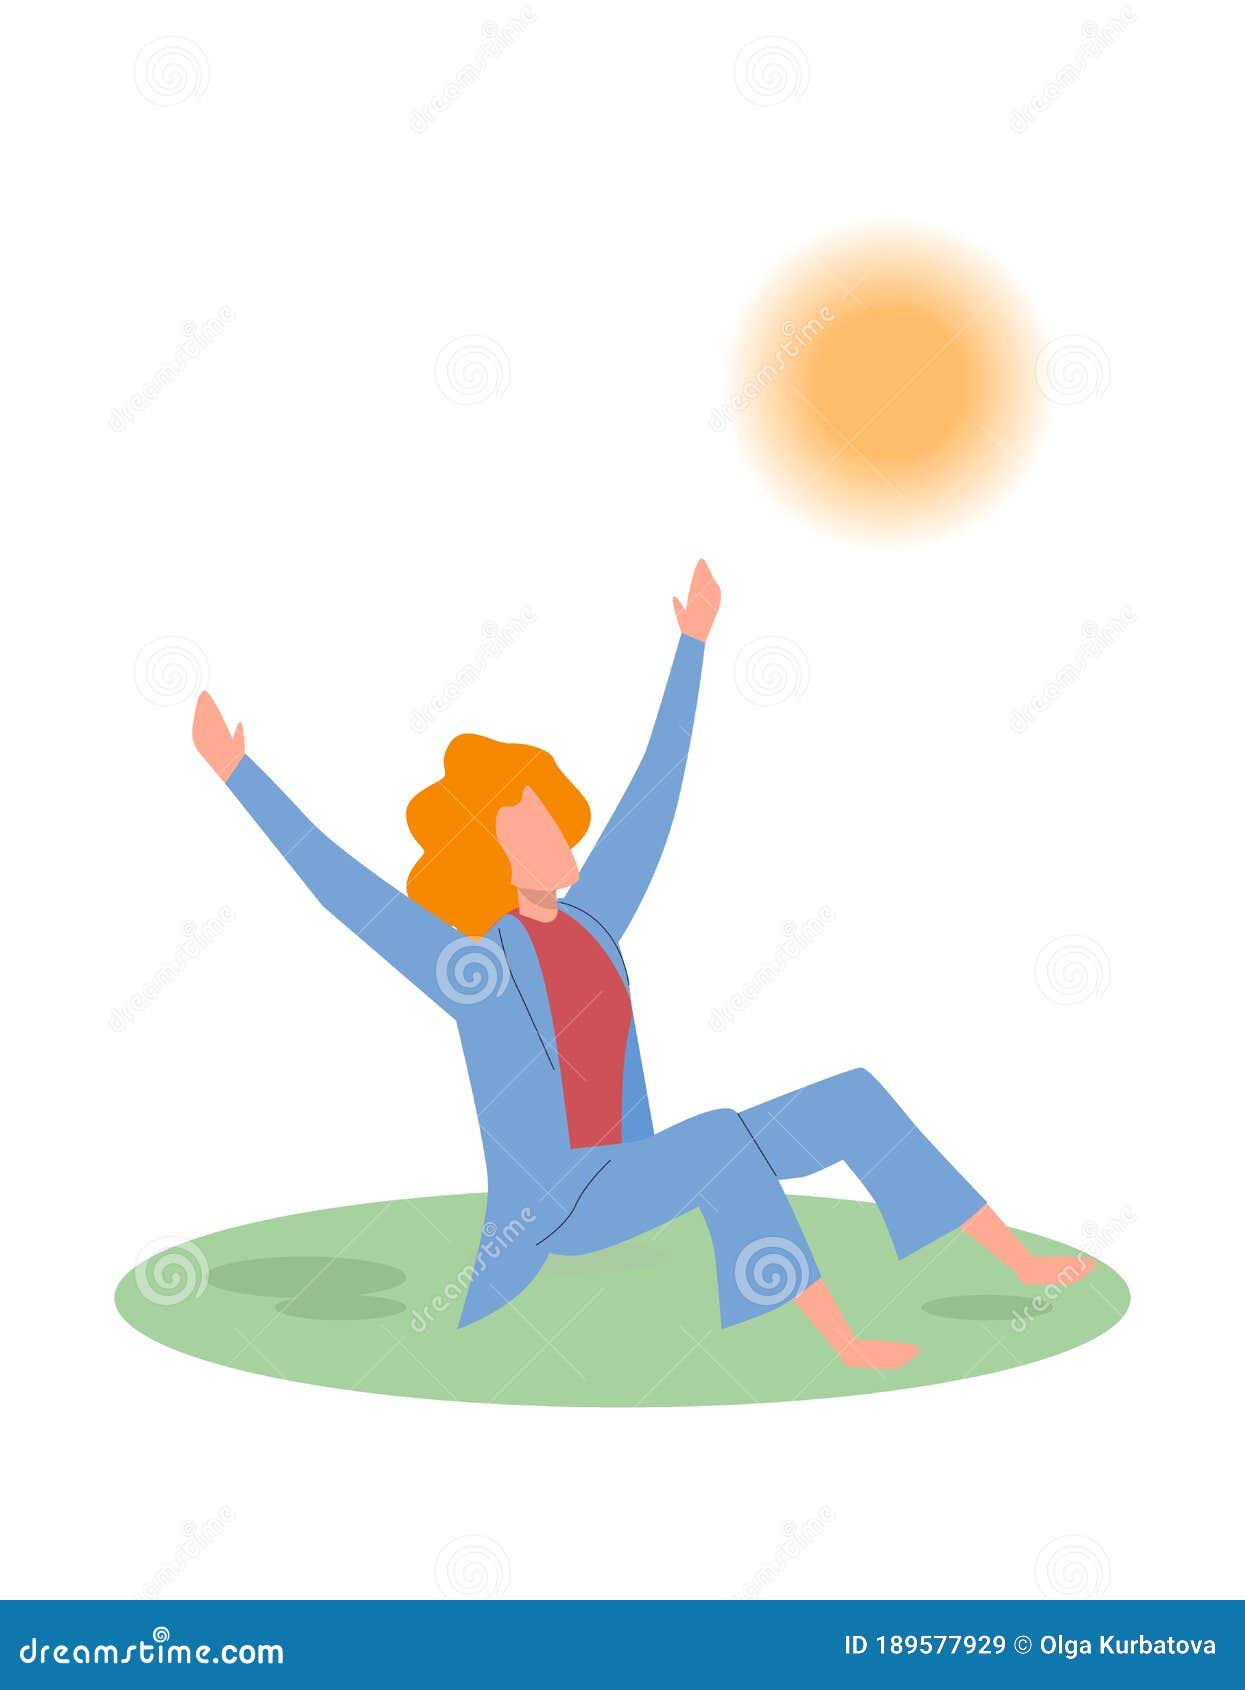 Girl is Happy. Young Girl or Teen Enjoys Life, Good Mood, Woman Sitting on  Grass in Park, Positive Thinking, Cartoon Stock Vector - Illustration of  happiness, green: 189577929